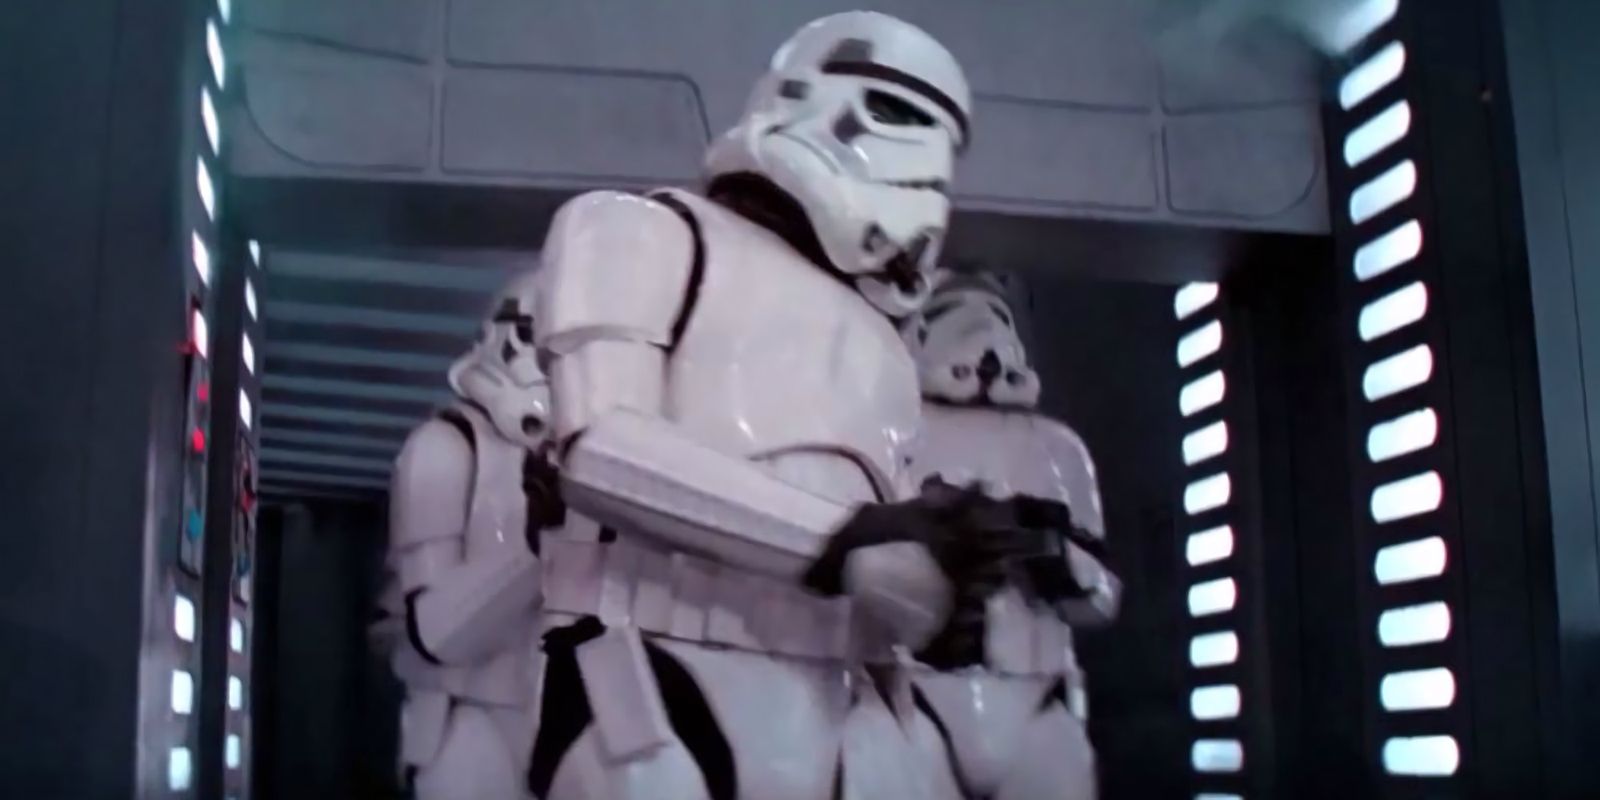 A Stormtrooper hits their head in Star Wars A New Hope